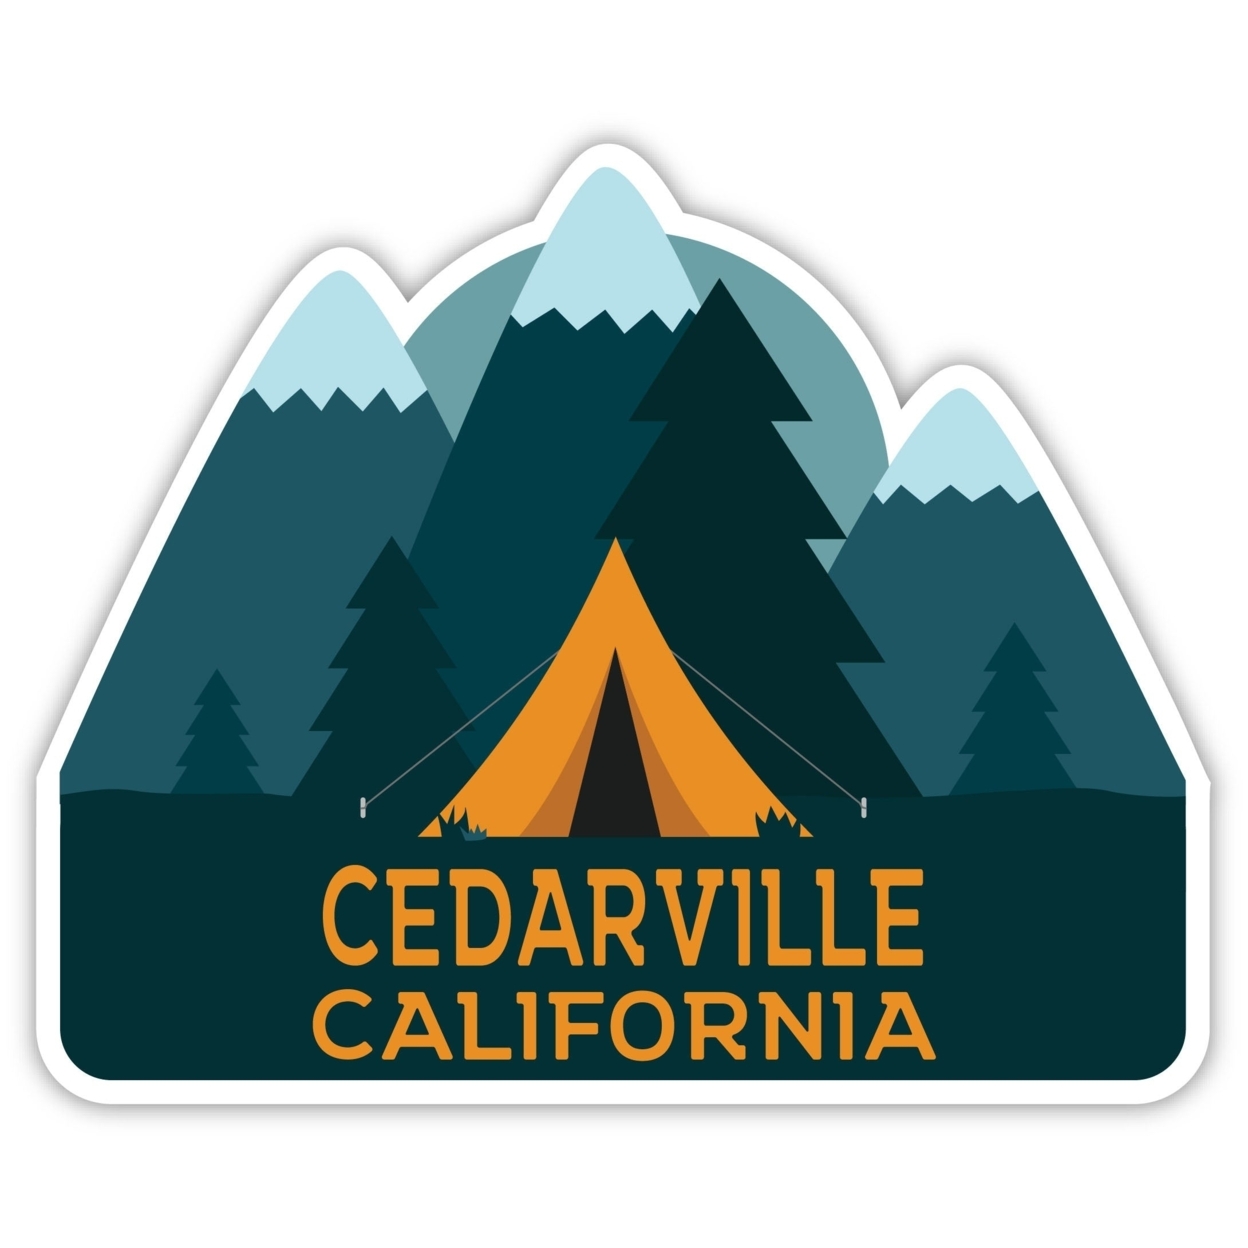 Cedarville California Souvenir Decorative Stickers (Choose Theme And Size) - 4-Pack, 8-Inch, Tent